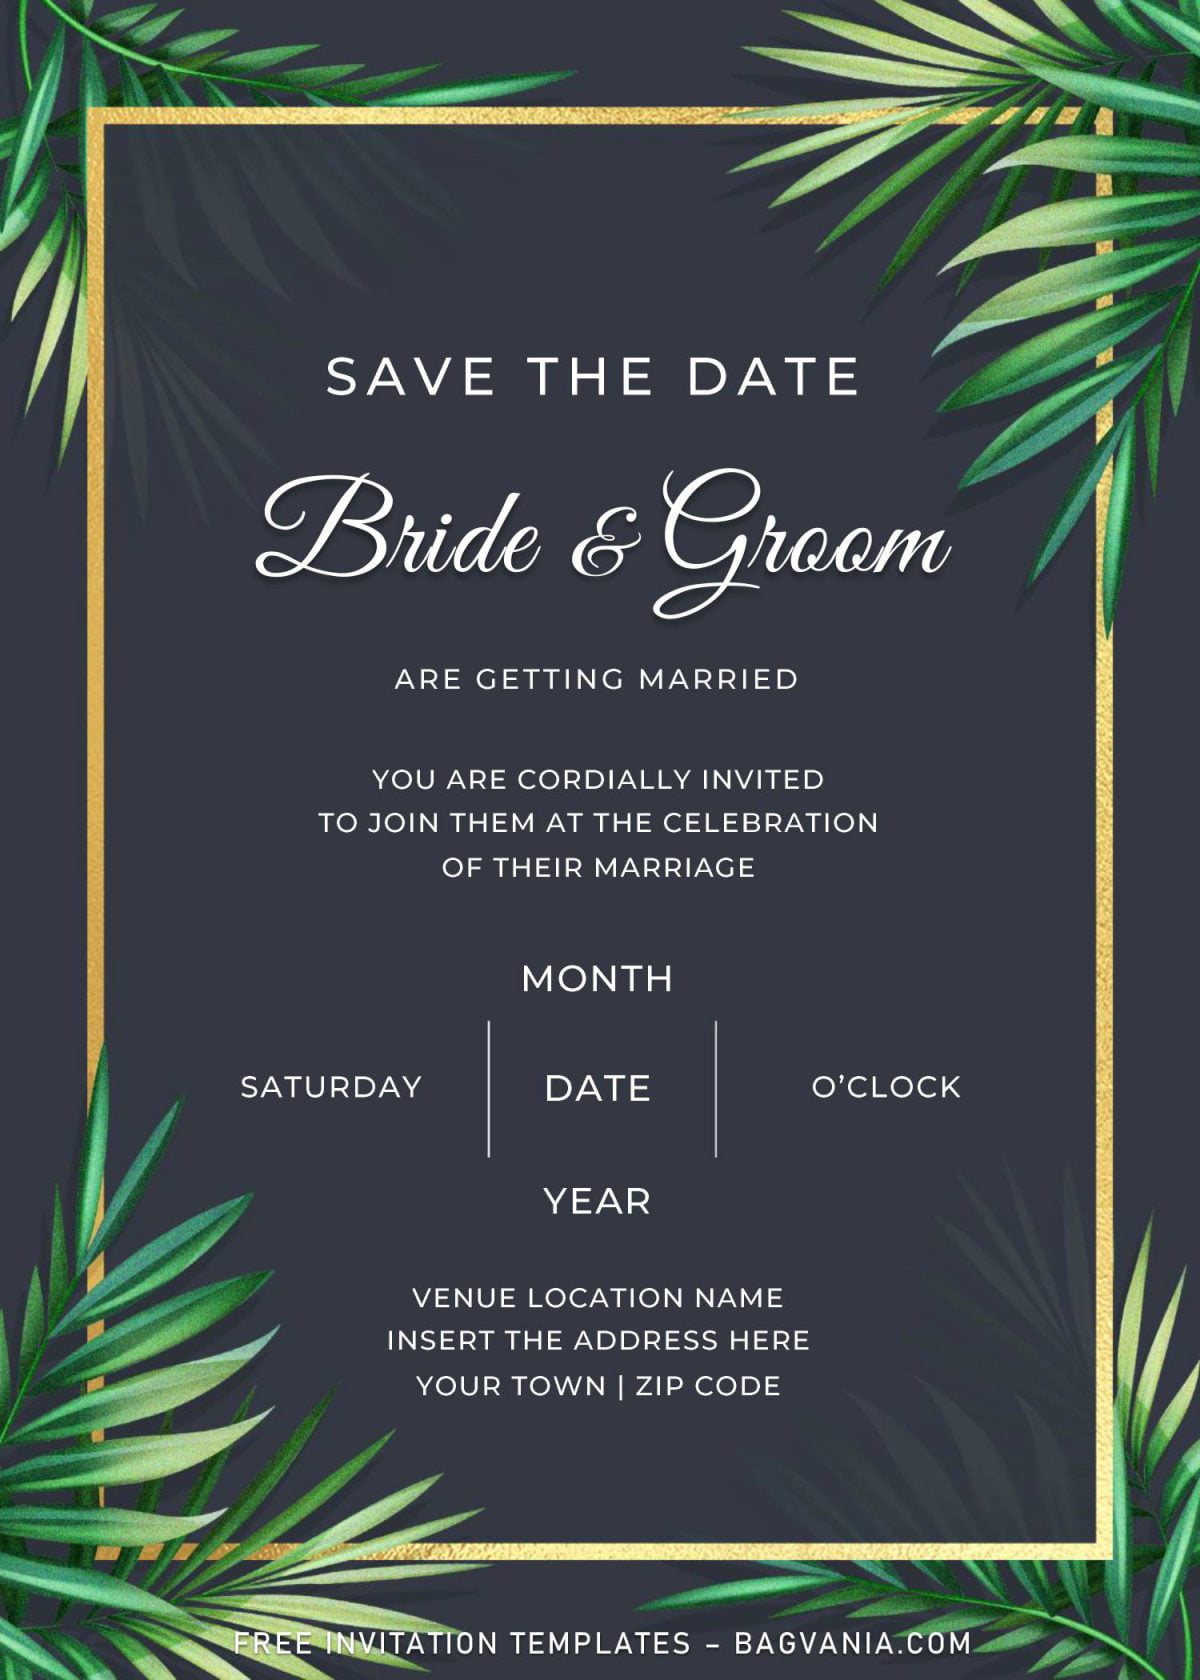 Free Greenery Wedding Invitation Templates For Word and has gold colored frame